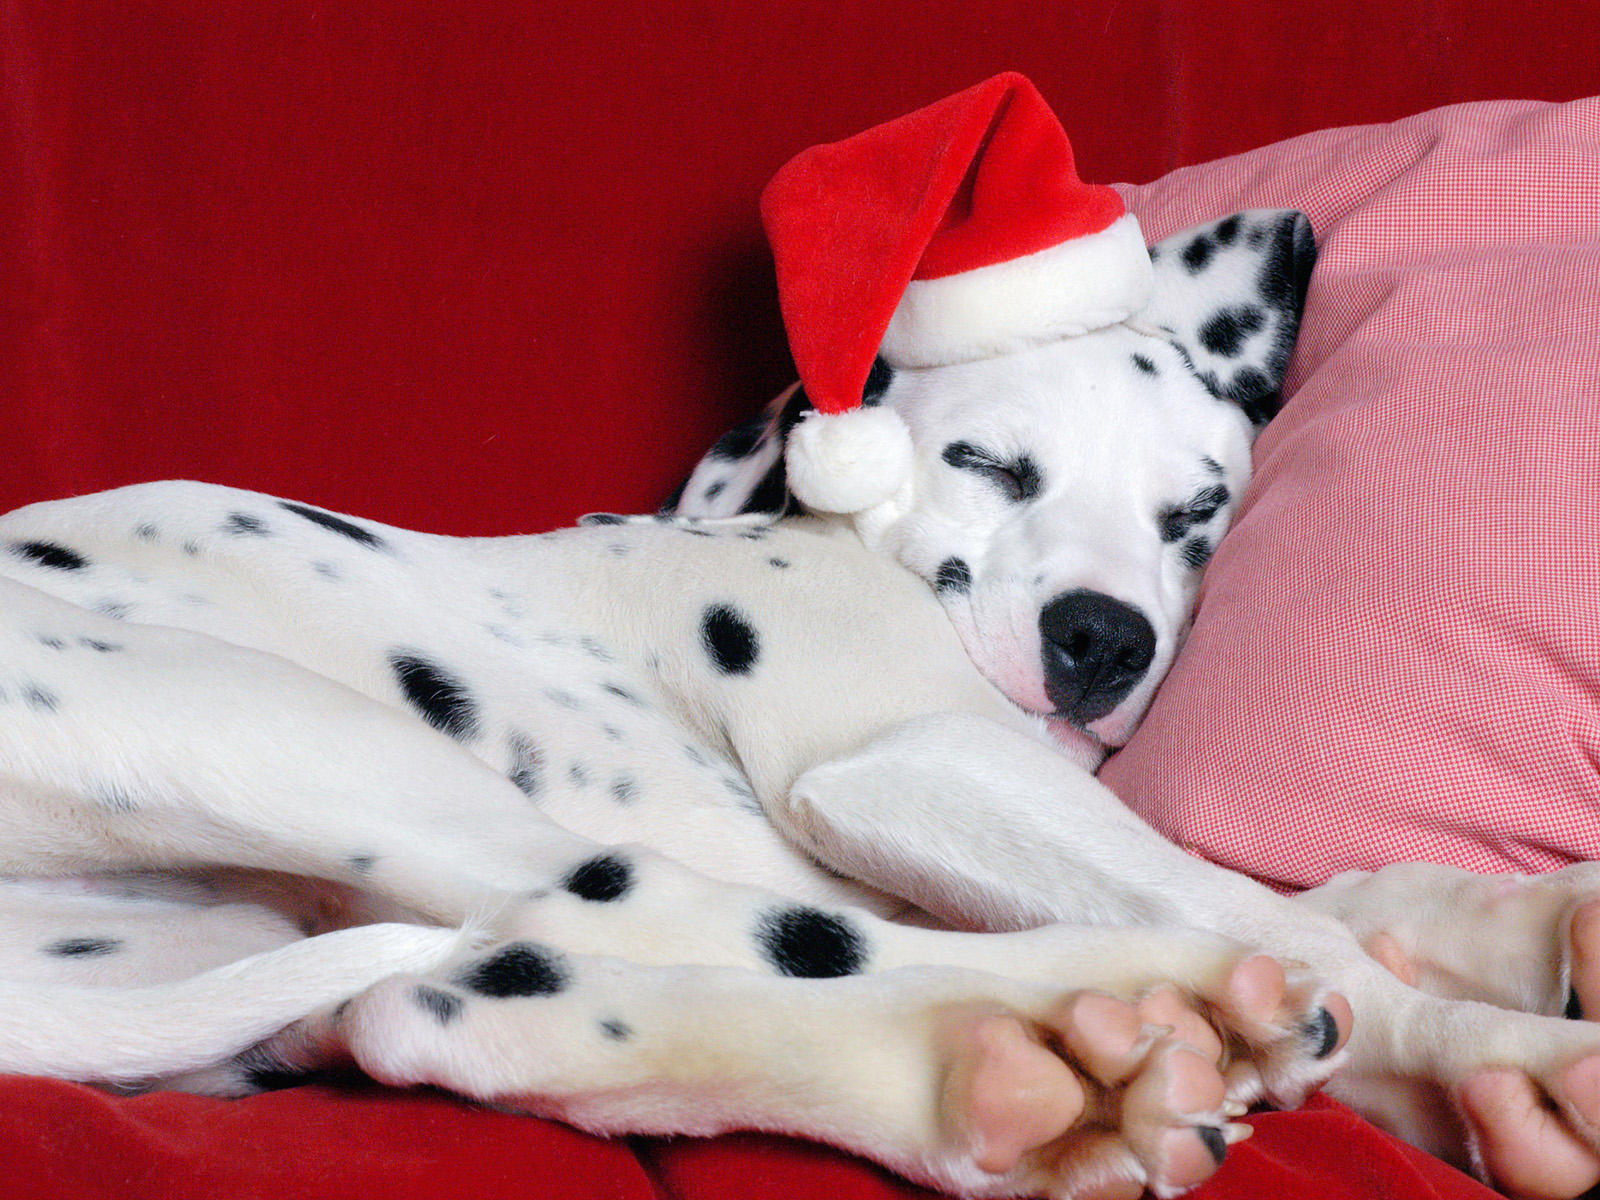 Dalmatian Dog Asleep With Head On Pillow Wearing Father Christmas Hat